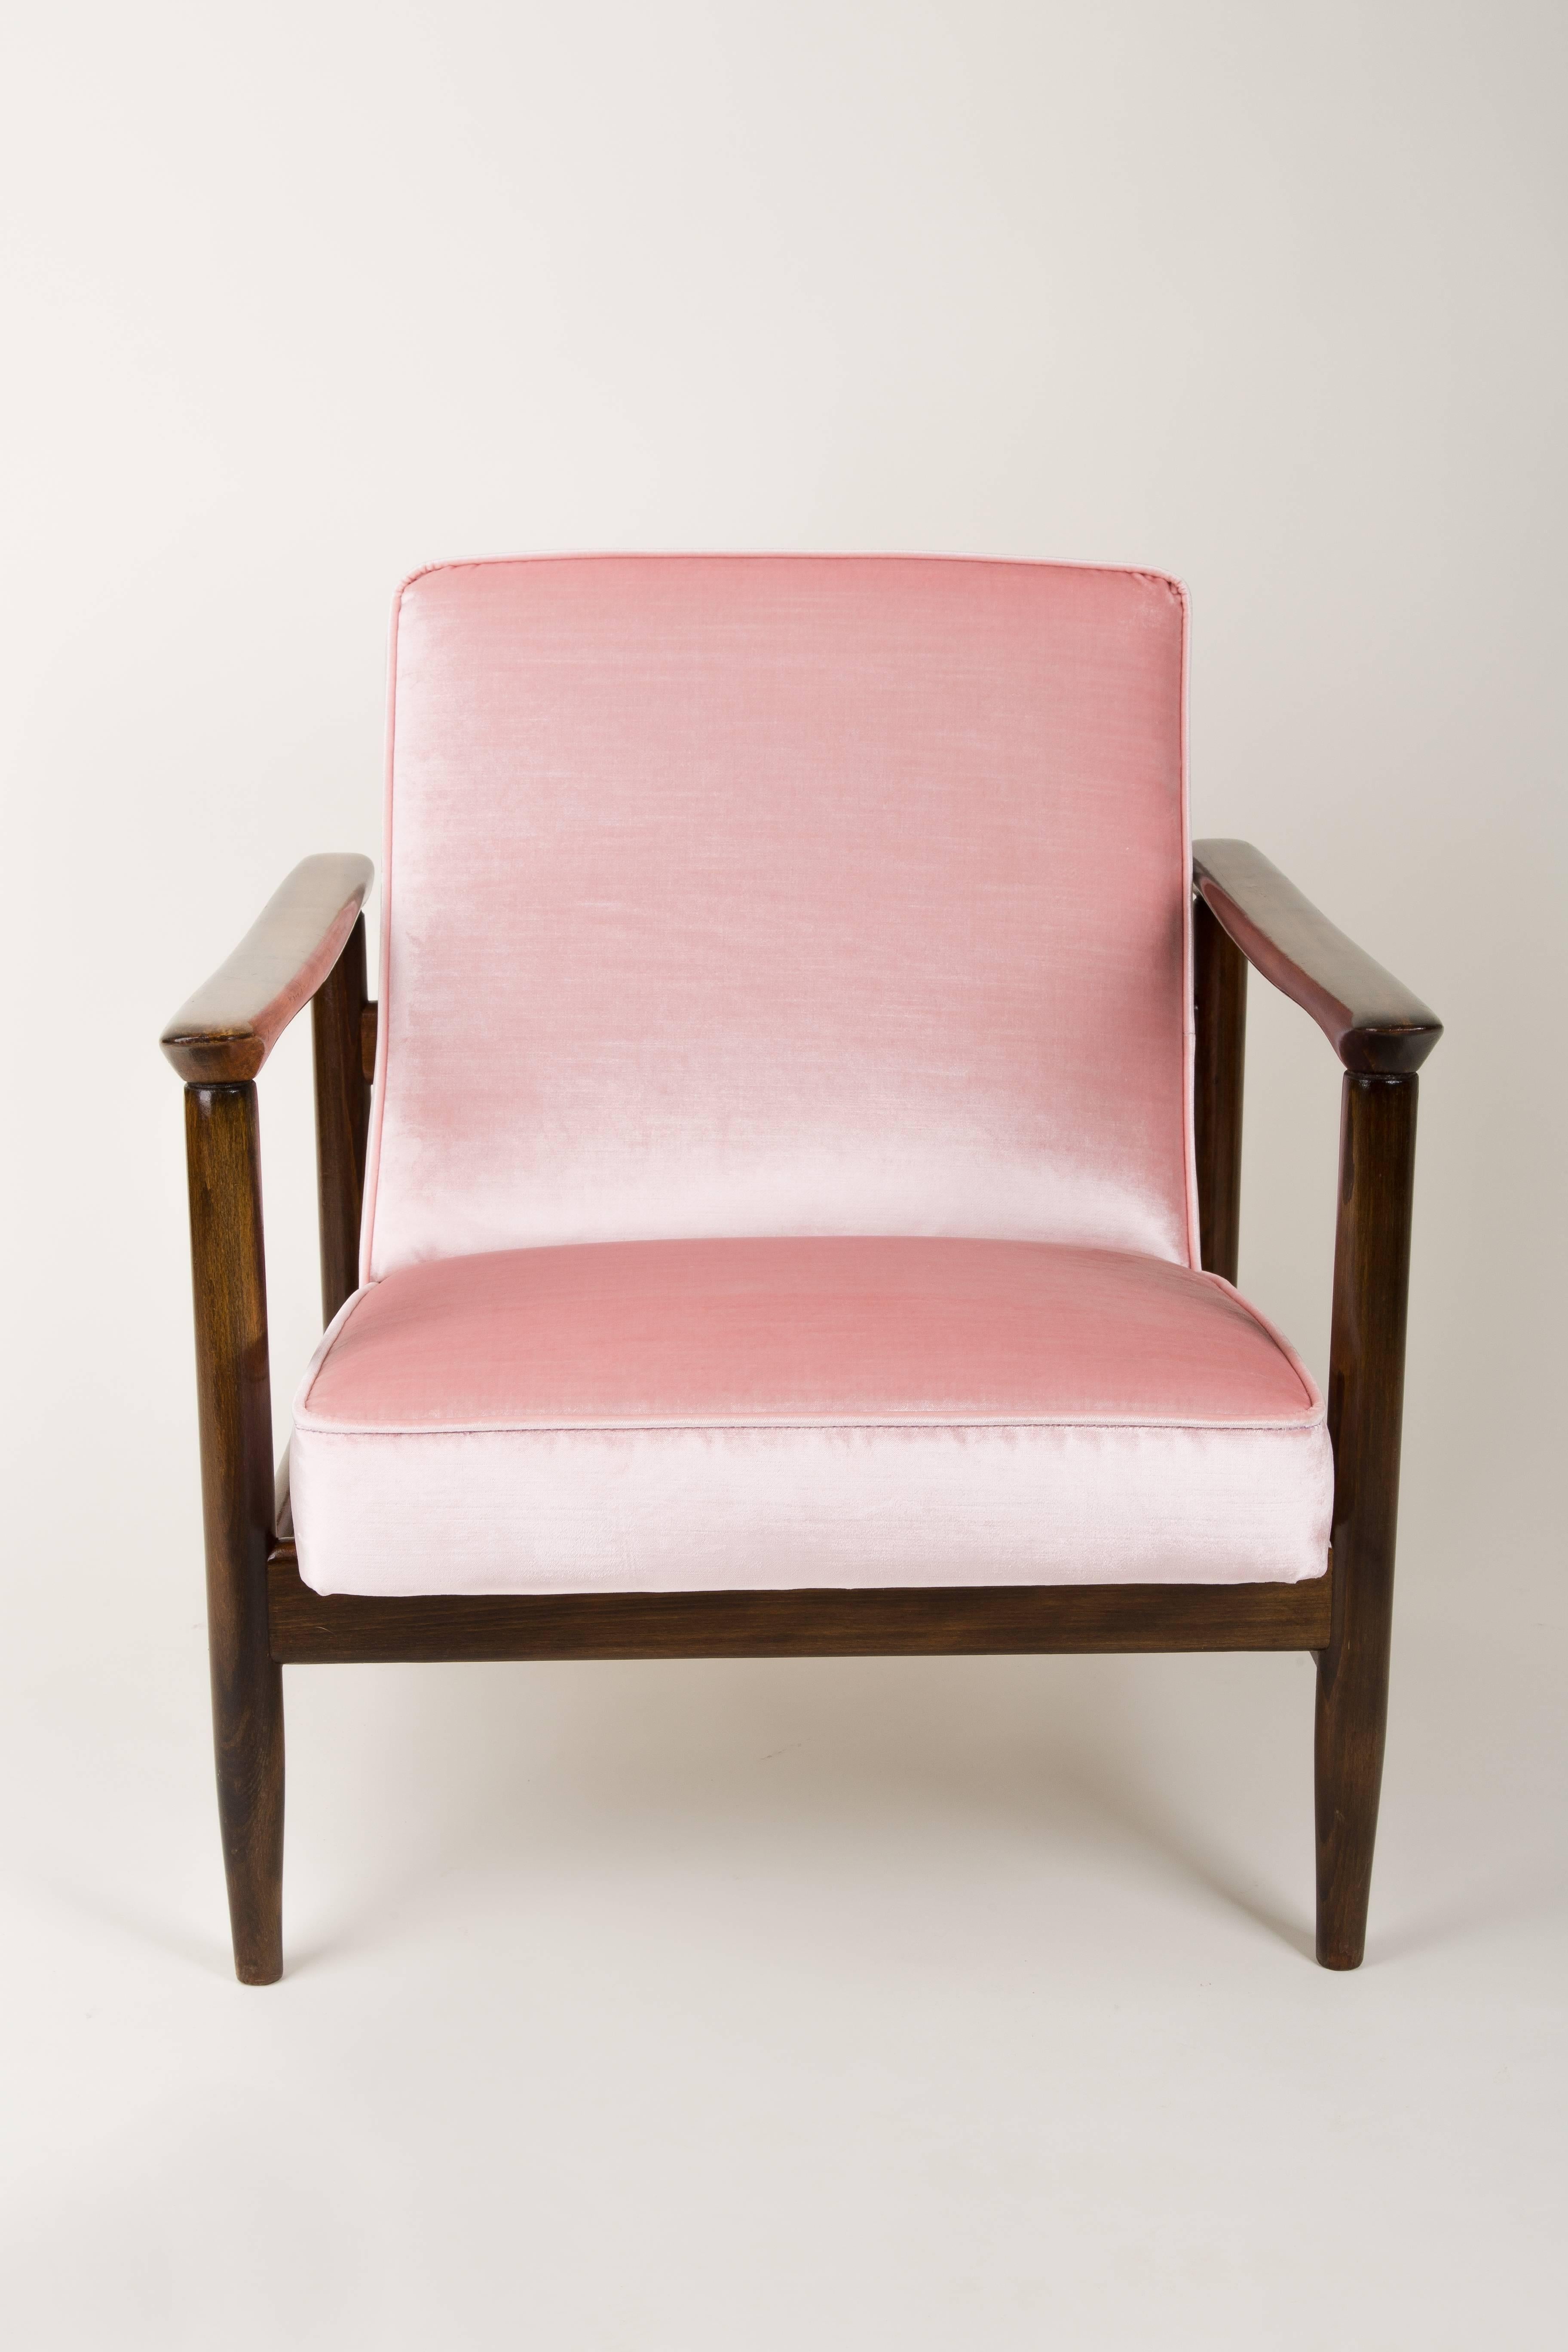 20th Century Pair of Baby Pink Velvet Armchairs, Designed by Edmund Homa, 1960s For Sale